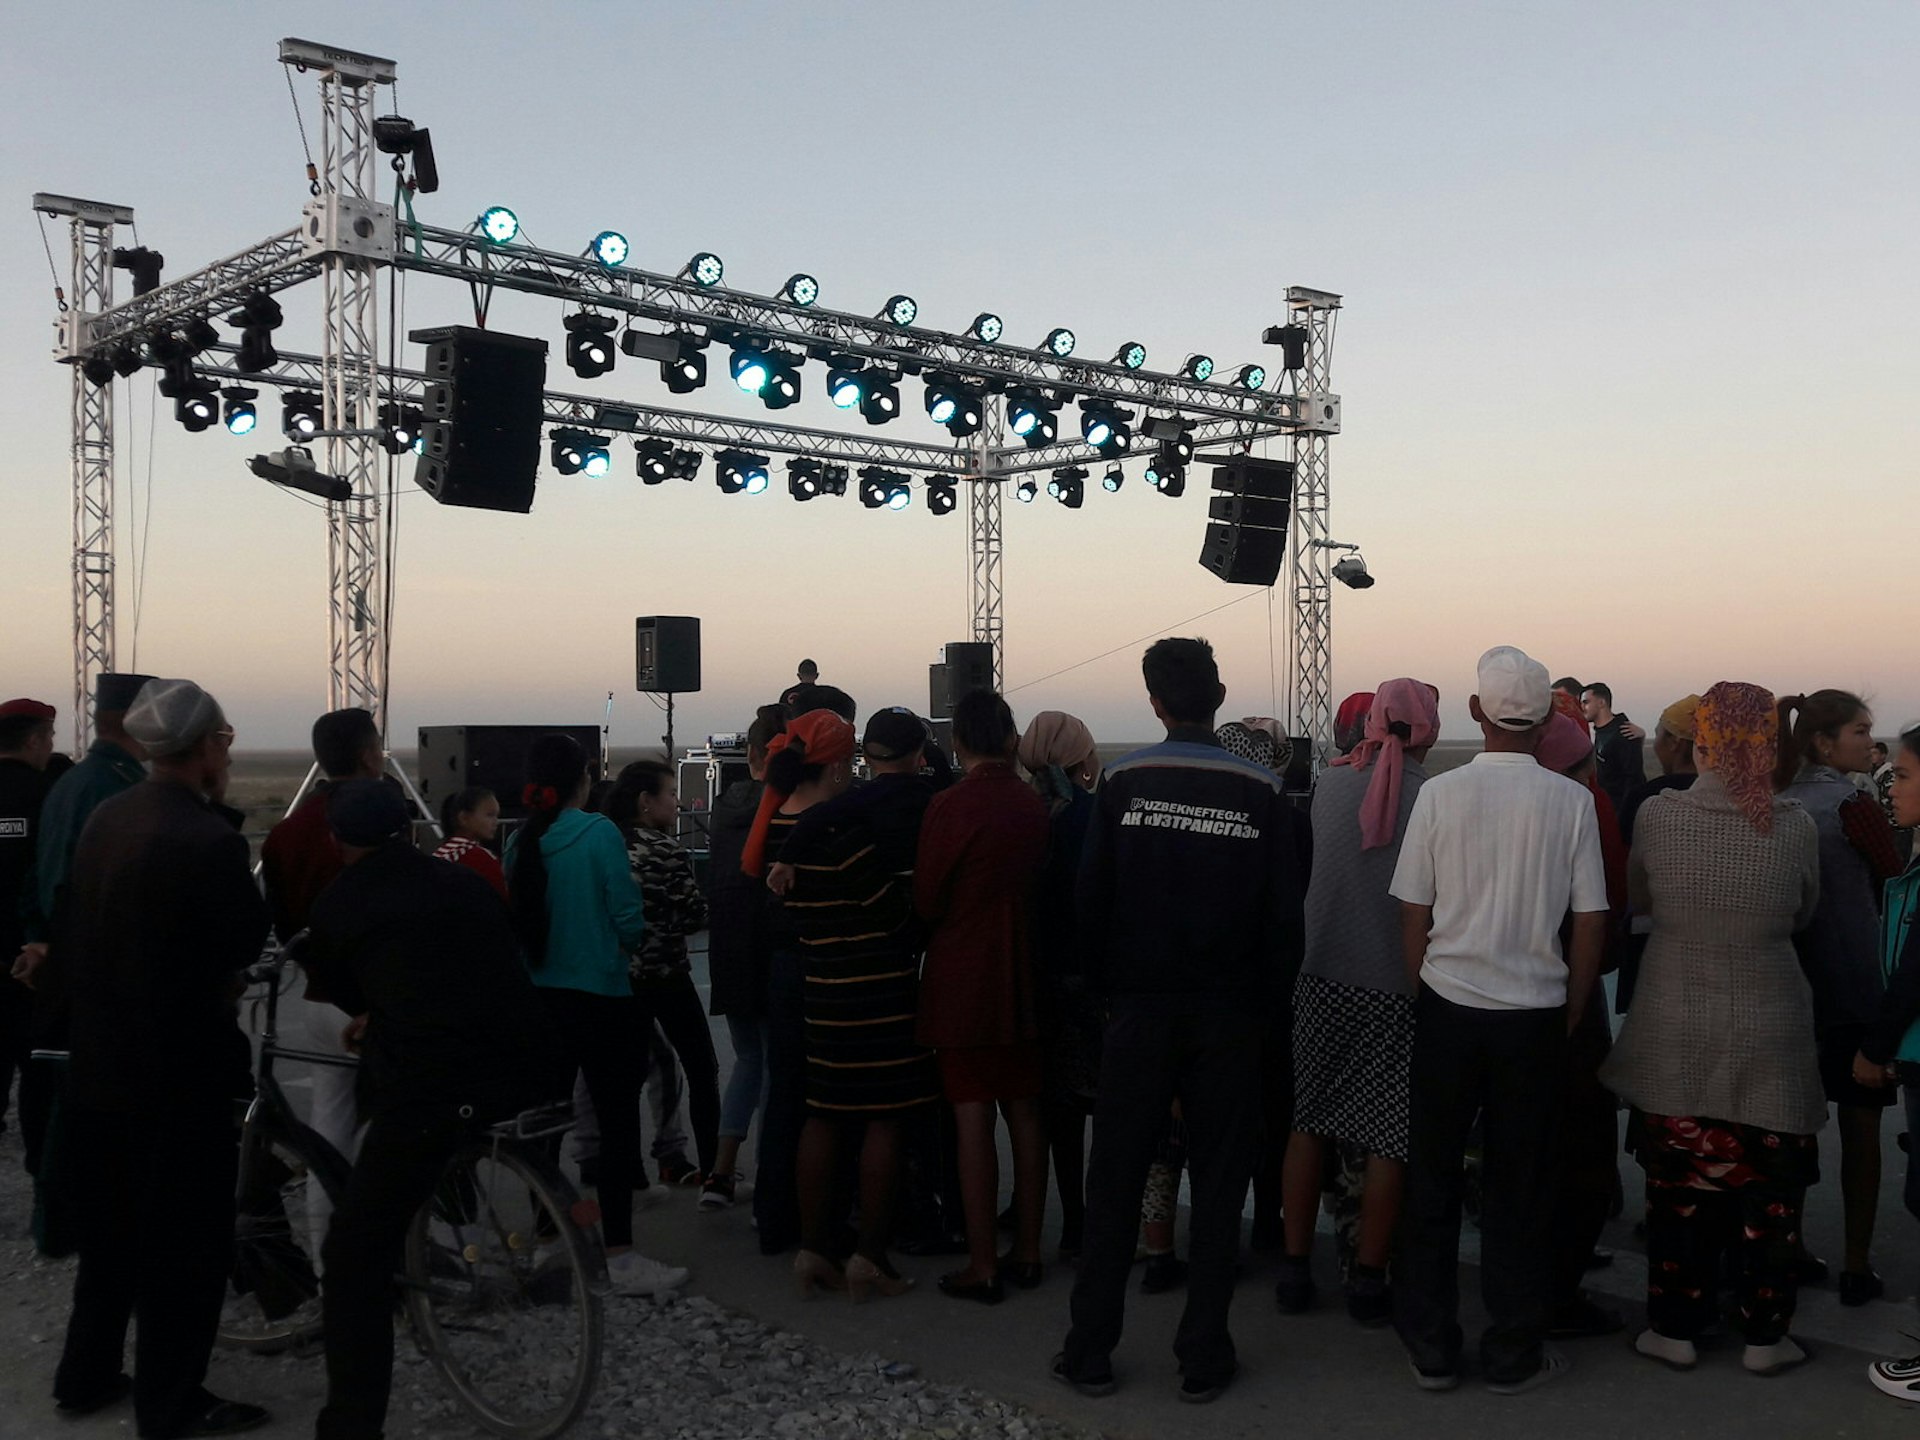 Festival attendees stand near a stage erected in the desert as the sun sets.